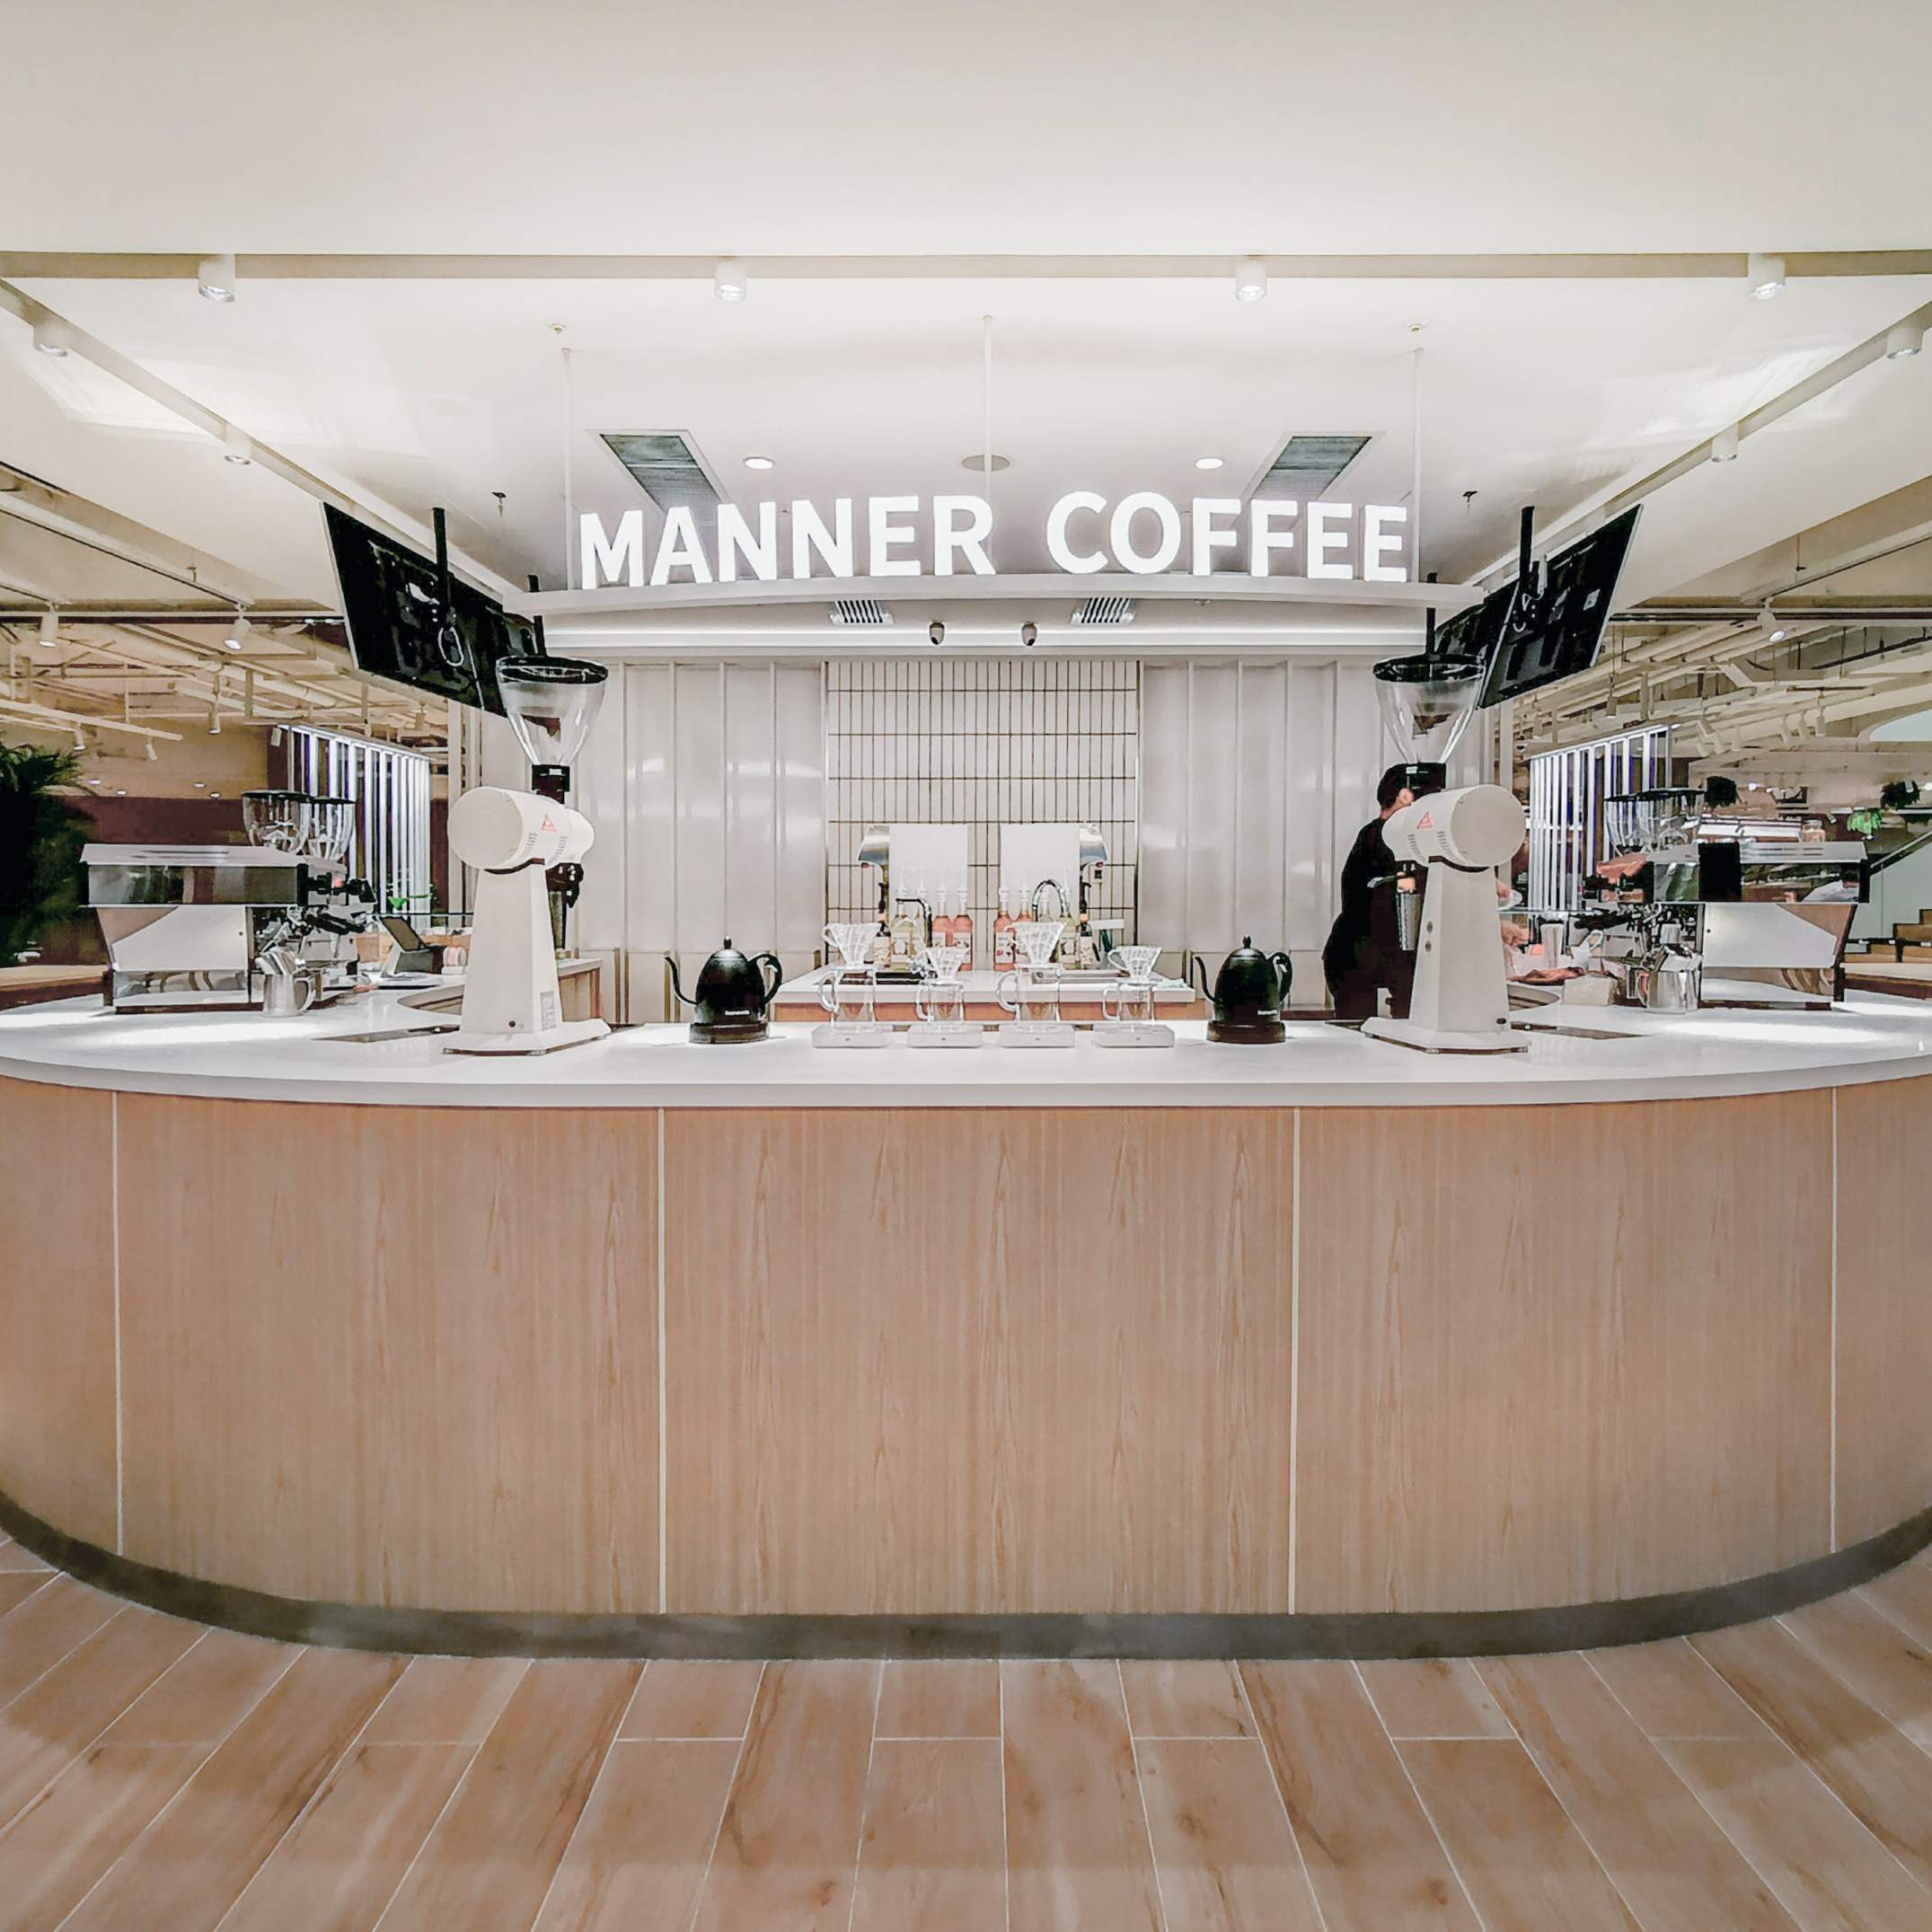 “Manner Coffee”, another miracle of China’s coffee industry after Luckin